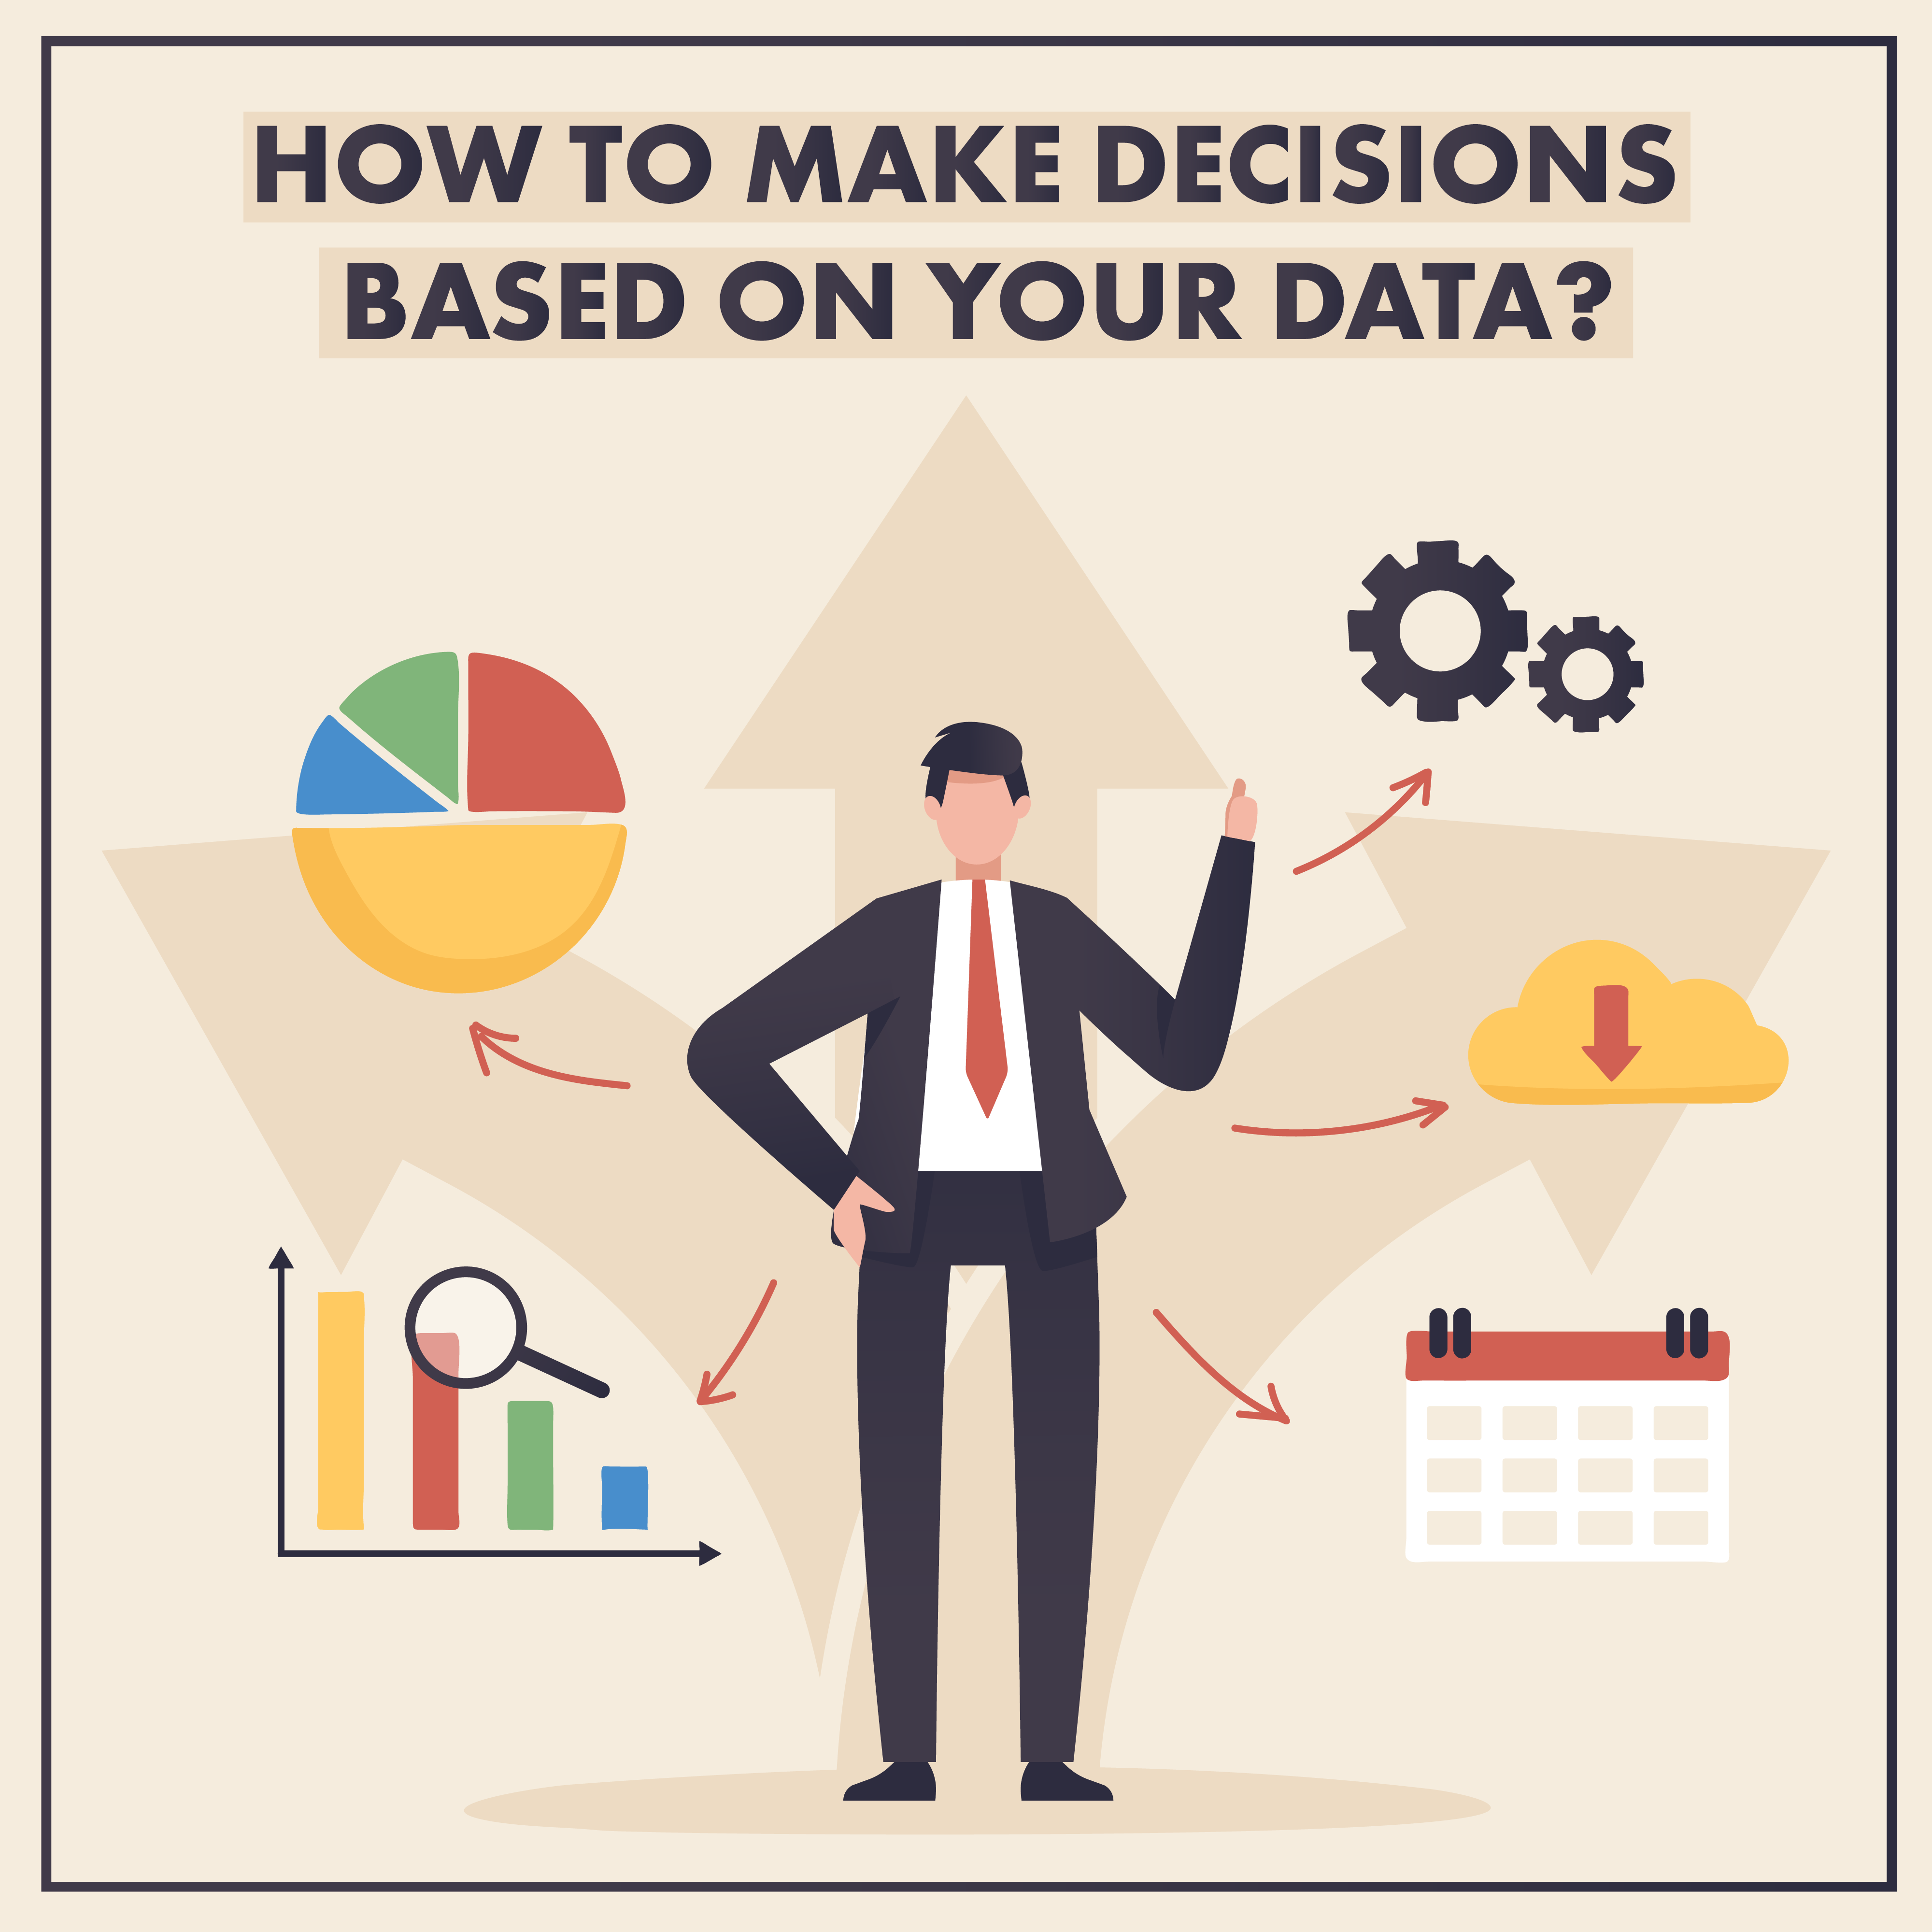 How to make decisions based on your data